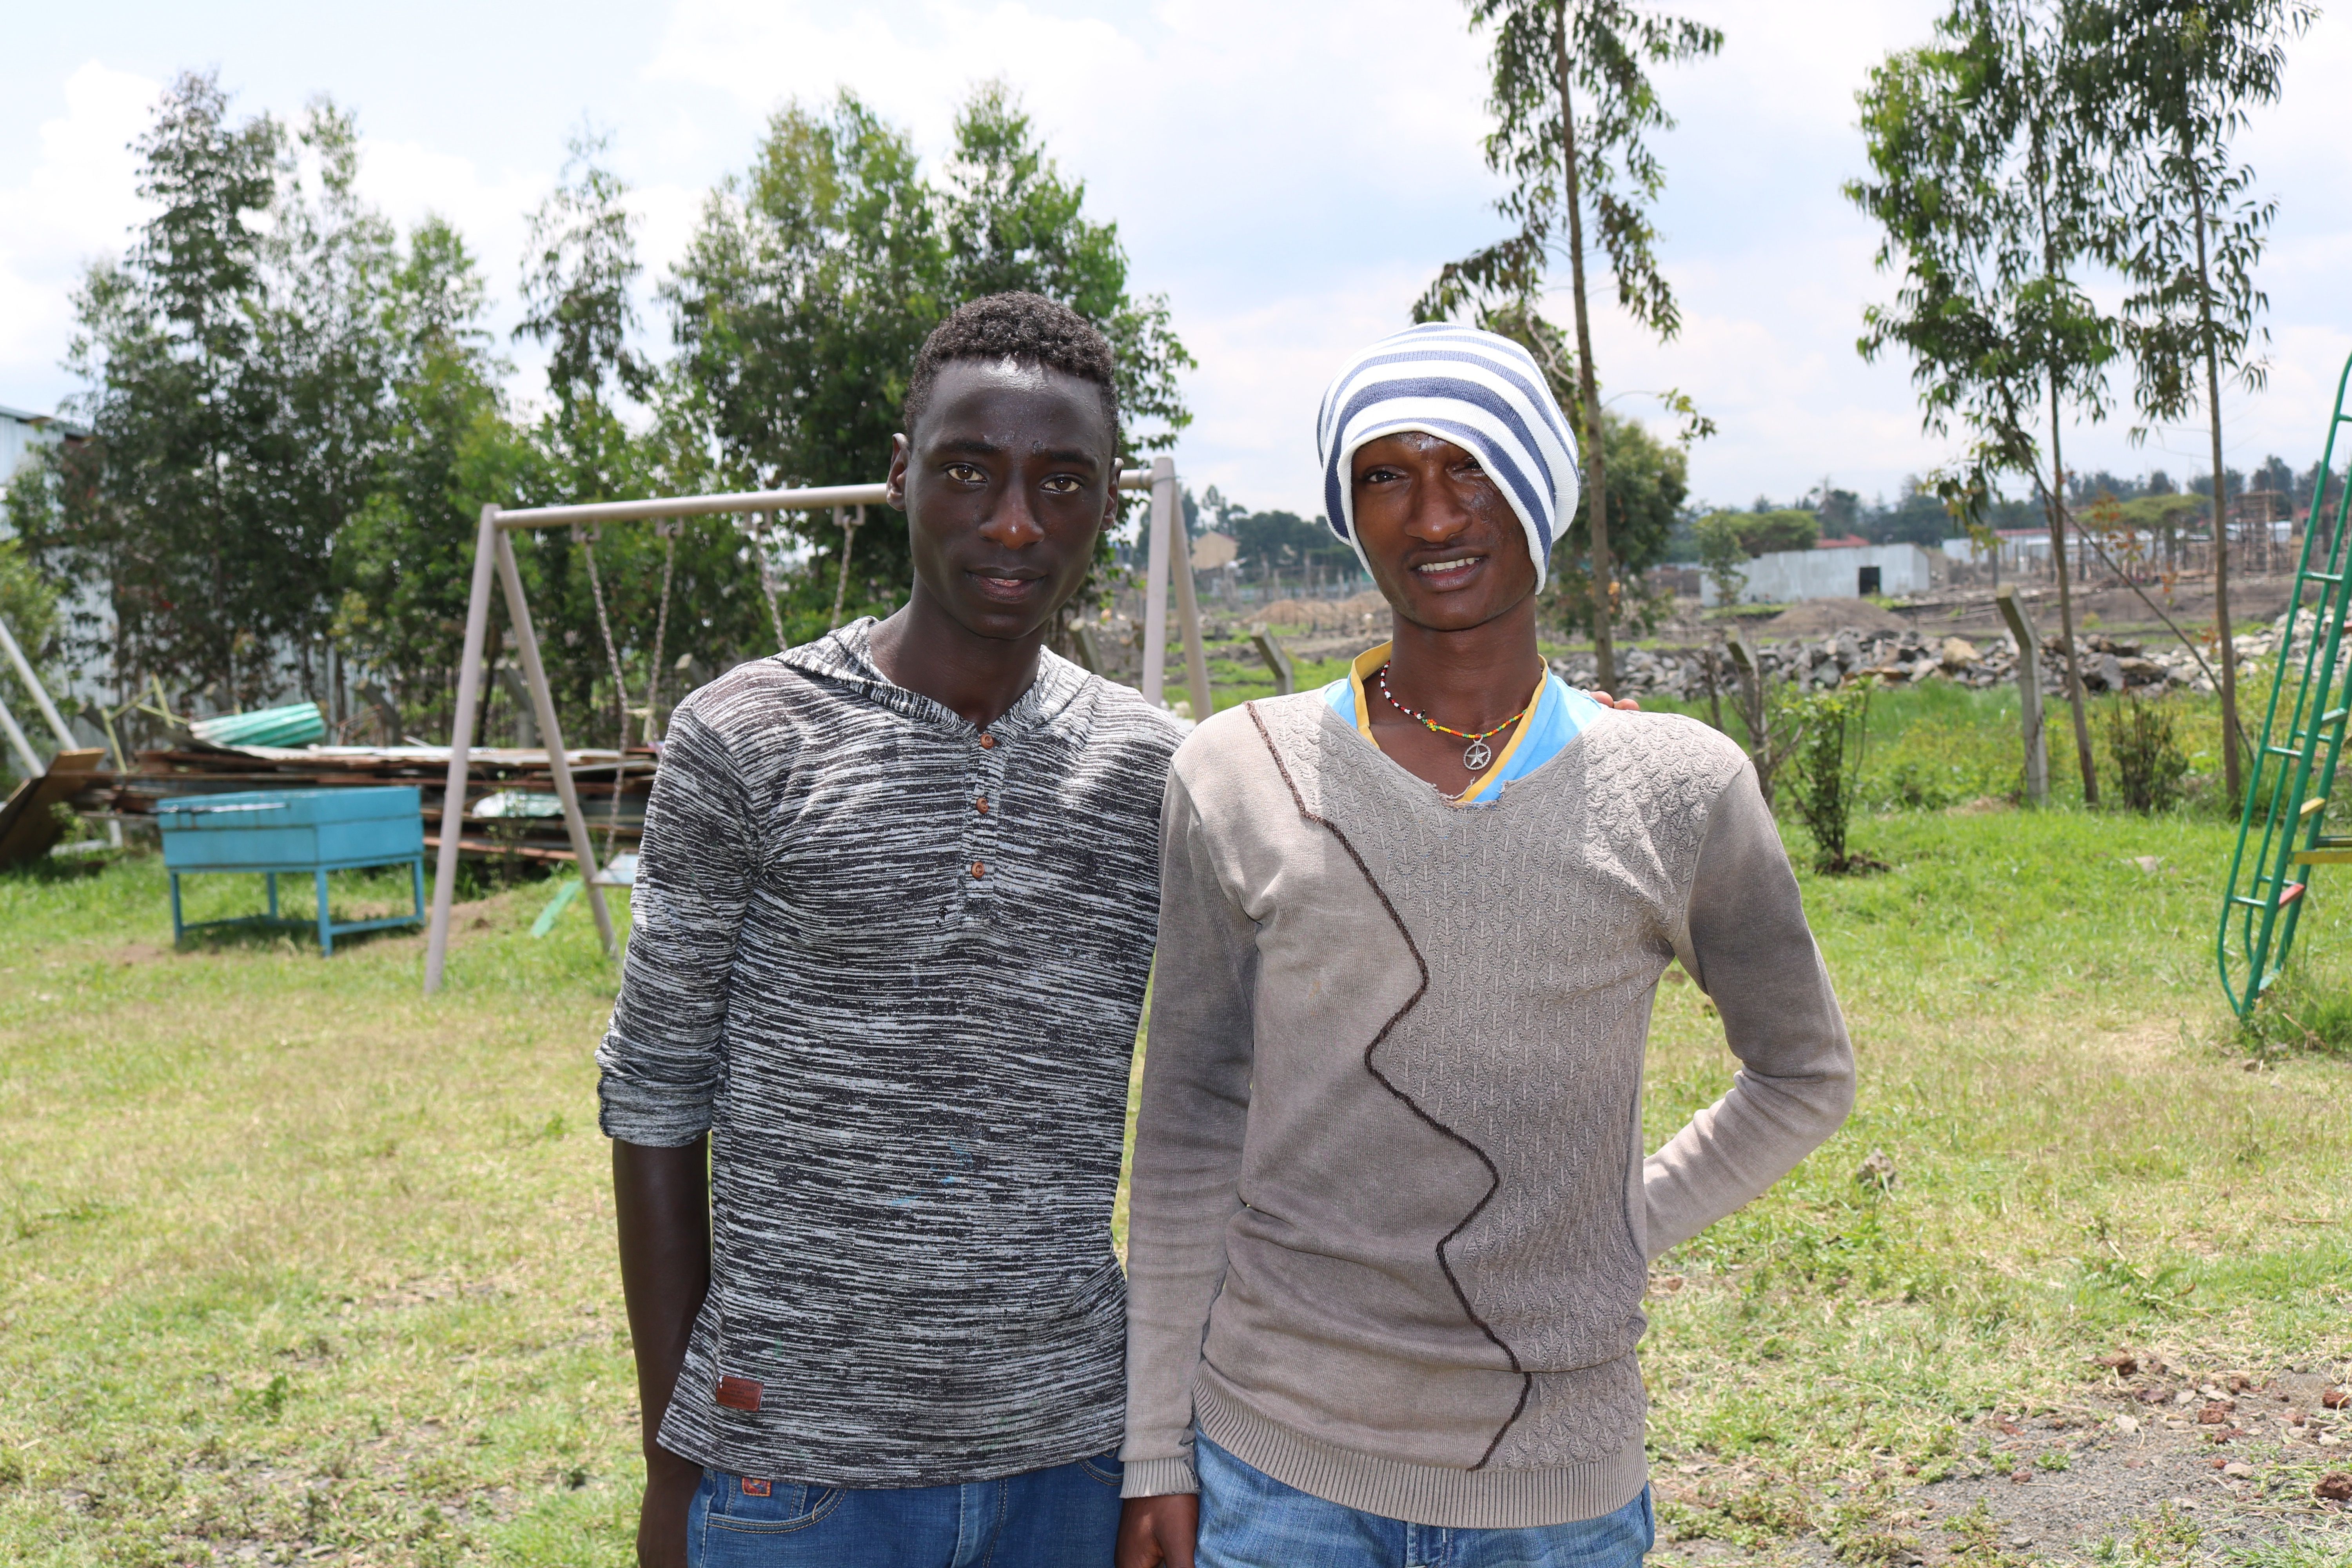 Amanuel Nasir and Haron Nasir are two brothers at the children's home. They are currently in 10th grade at school and both want to go to college. Amanuel wants to be a biochemical engineer and Haron wants to be a surgeon. Image by Abigail Bekele. Ethiopia, 2018.